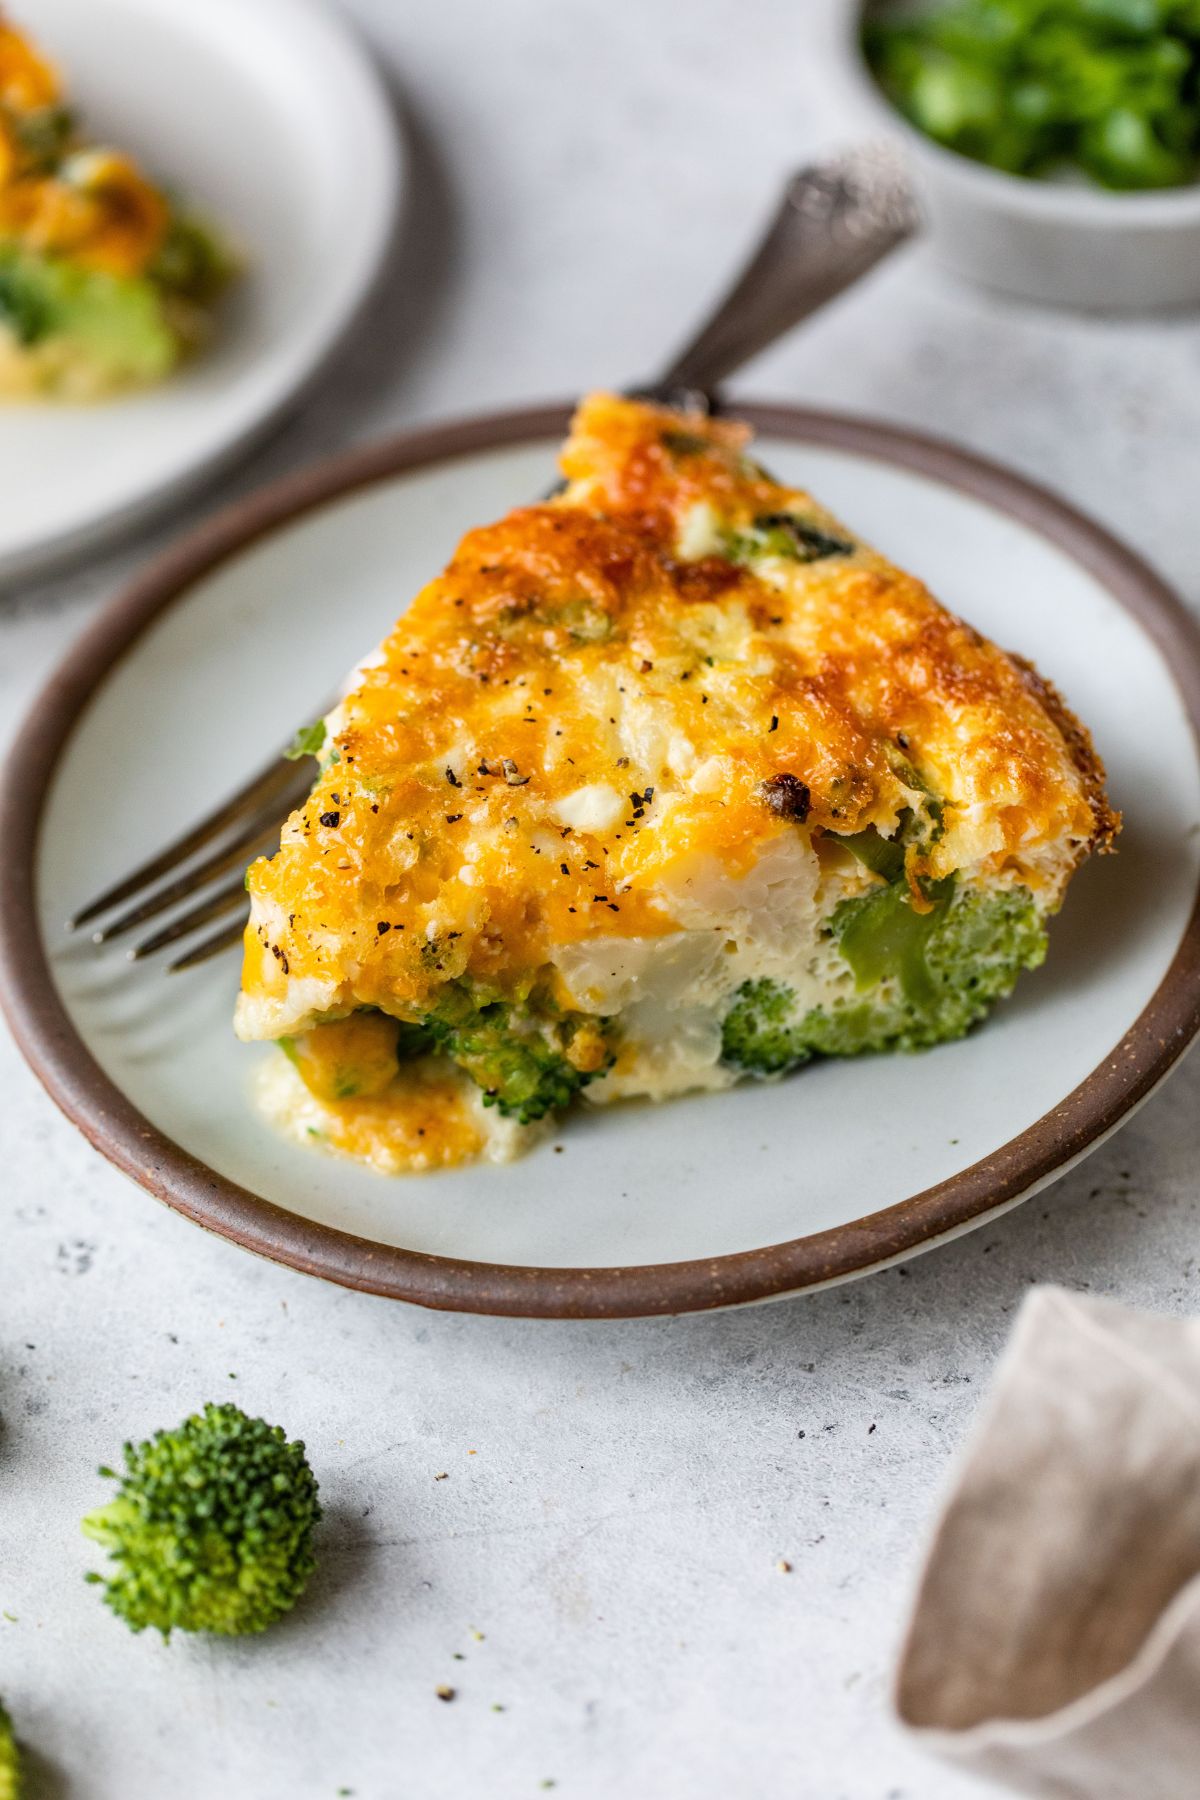 Crustless Quiche with Broccoli and Cauliflower « Clean & Delicious